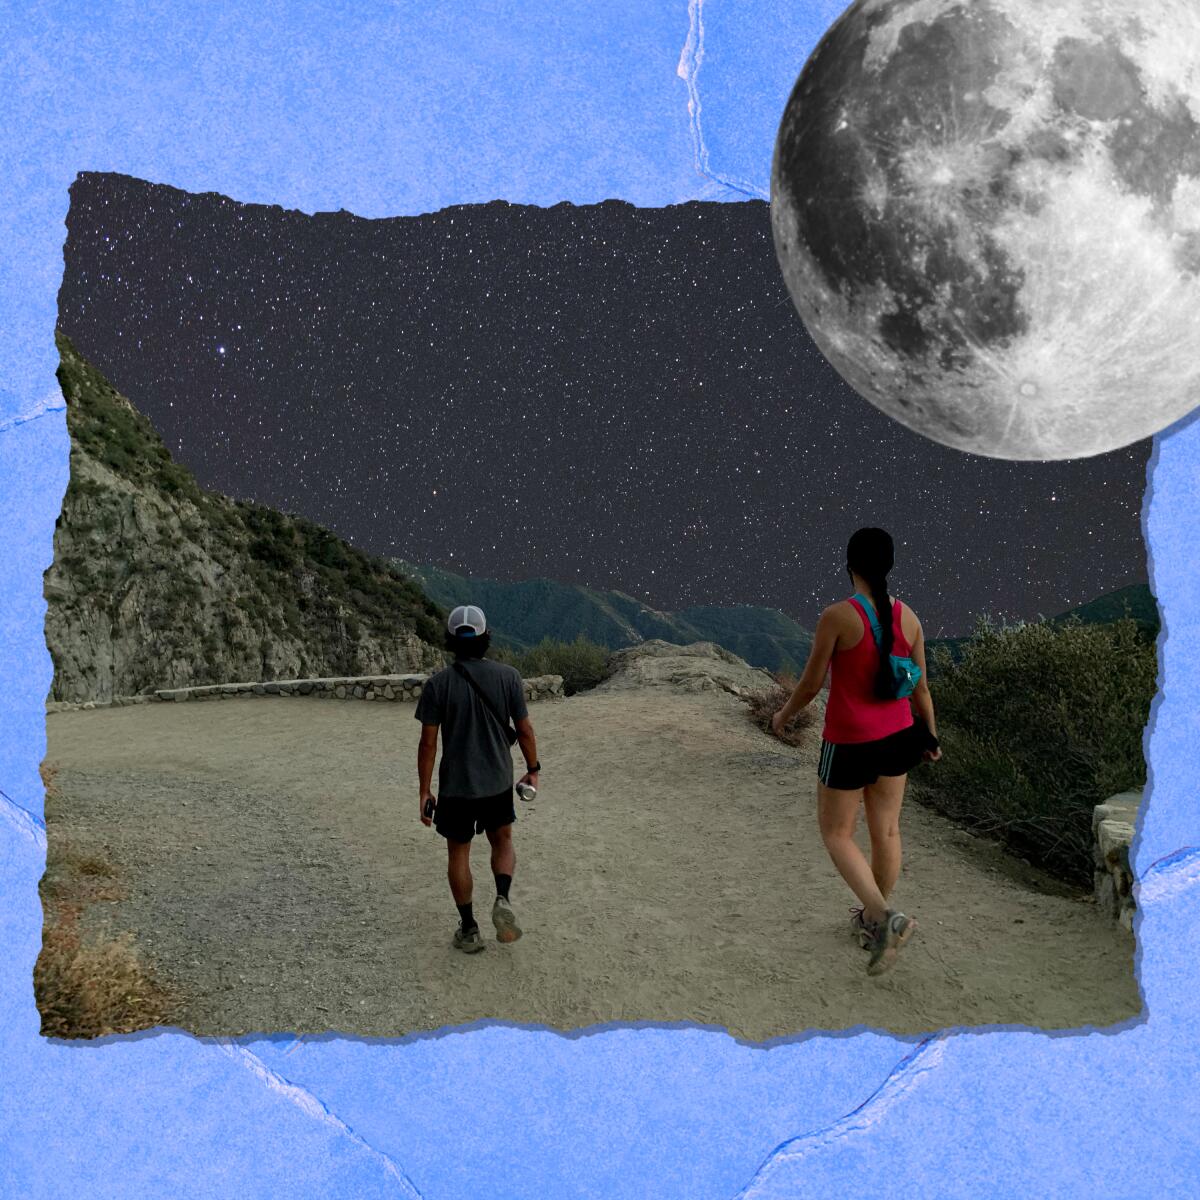 Hikers walk on a path. An illustration adds the night sky and the moon.